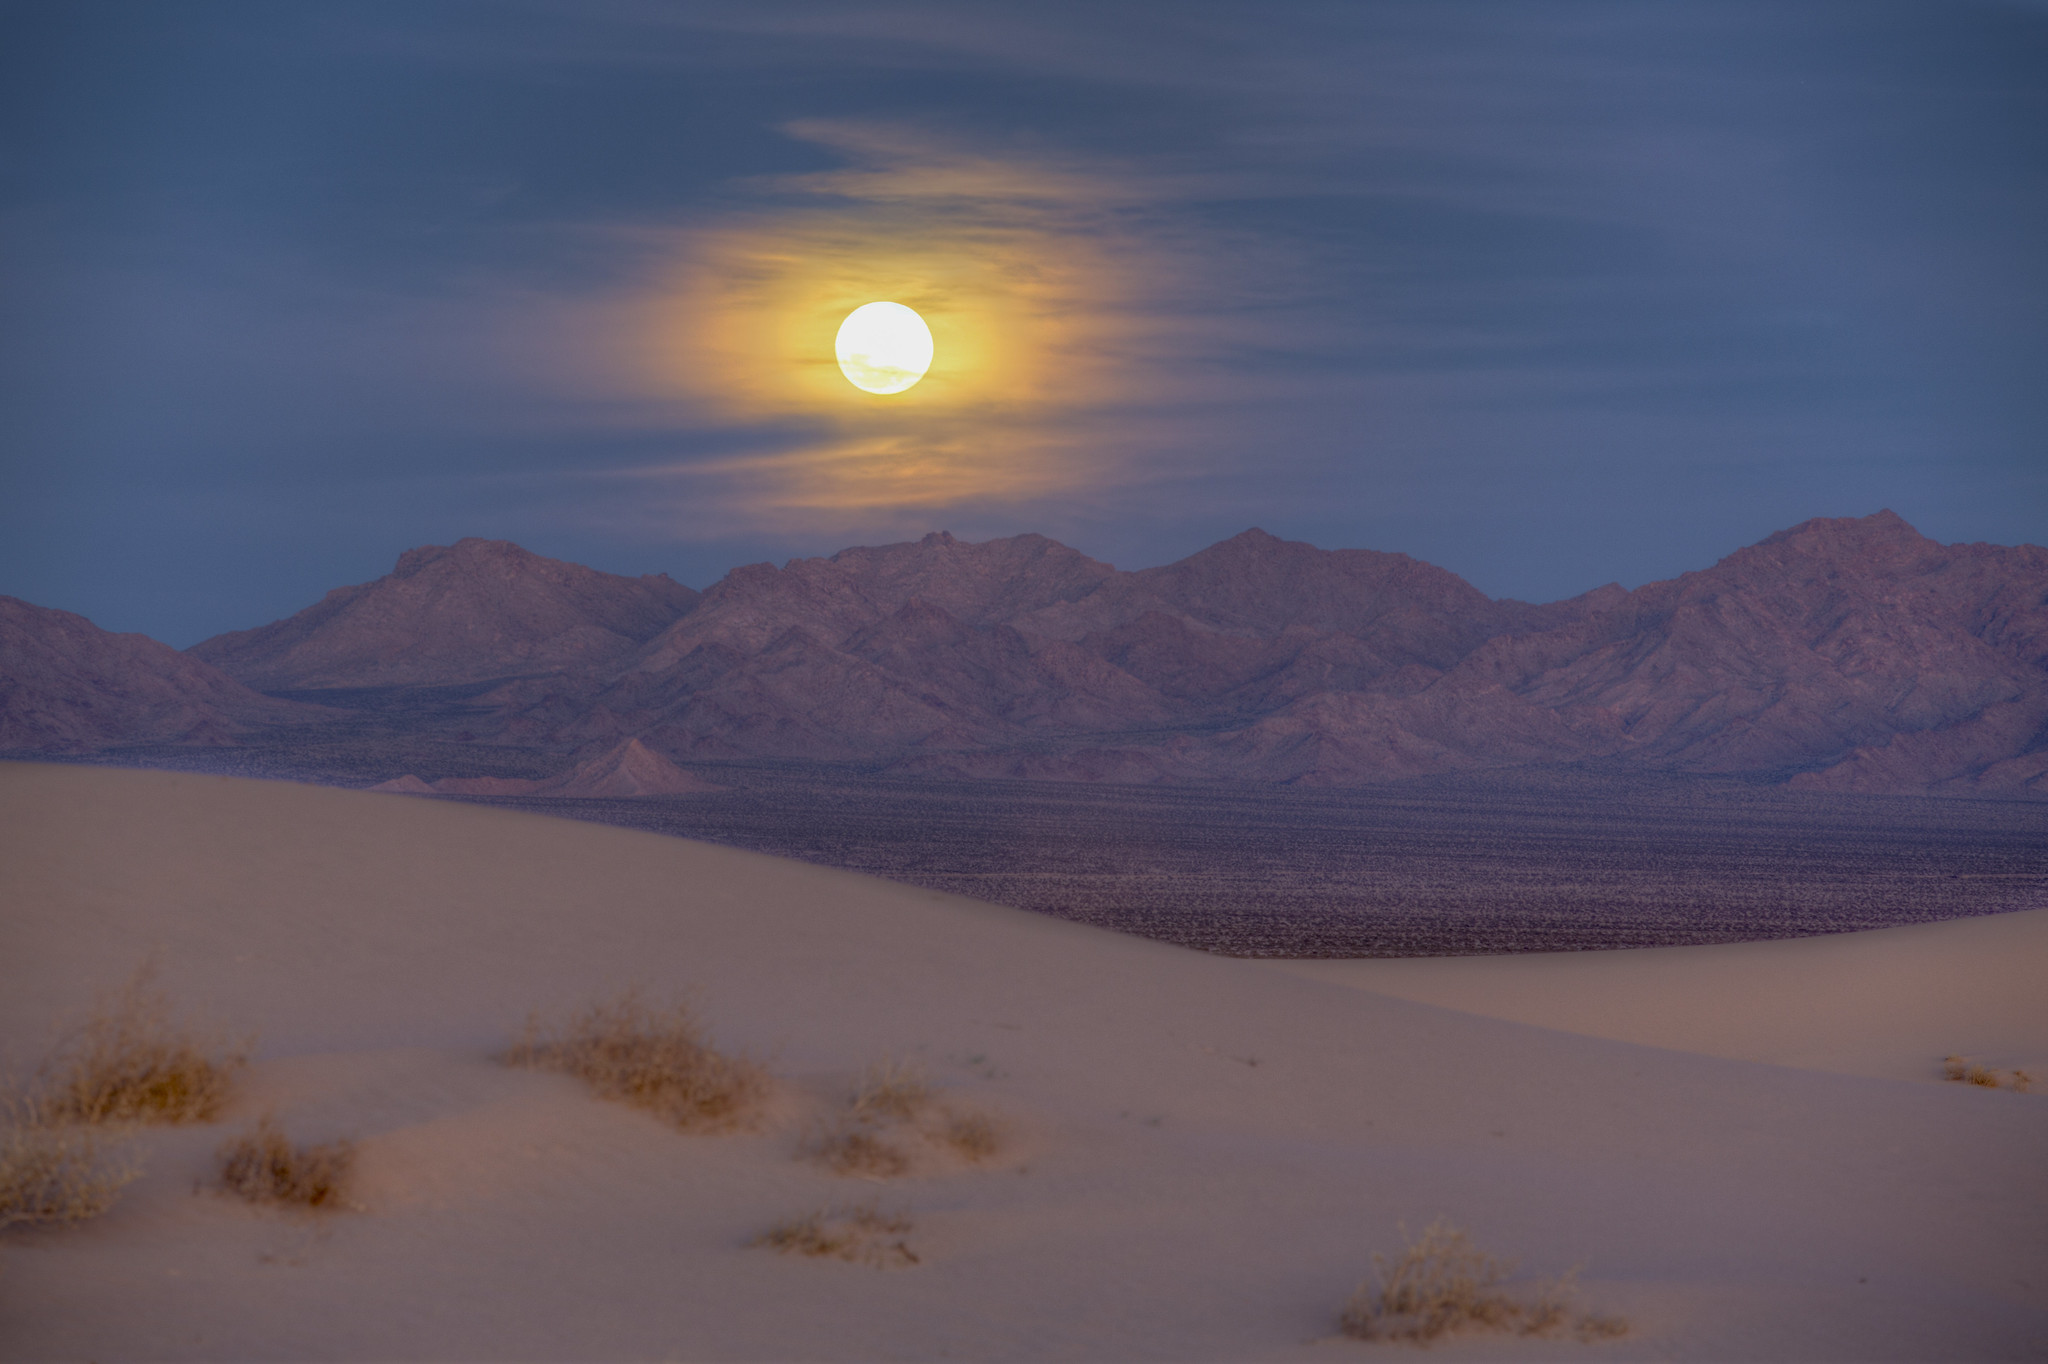 Cloudy sky with full moon over a purple mountain range and sand dunes.